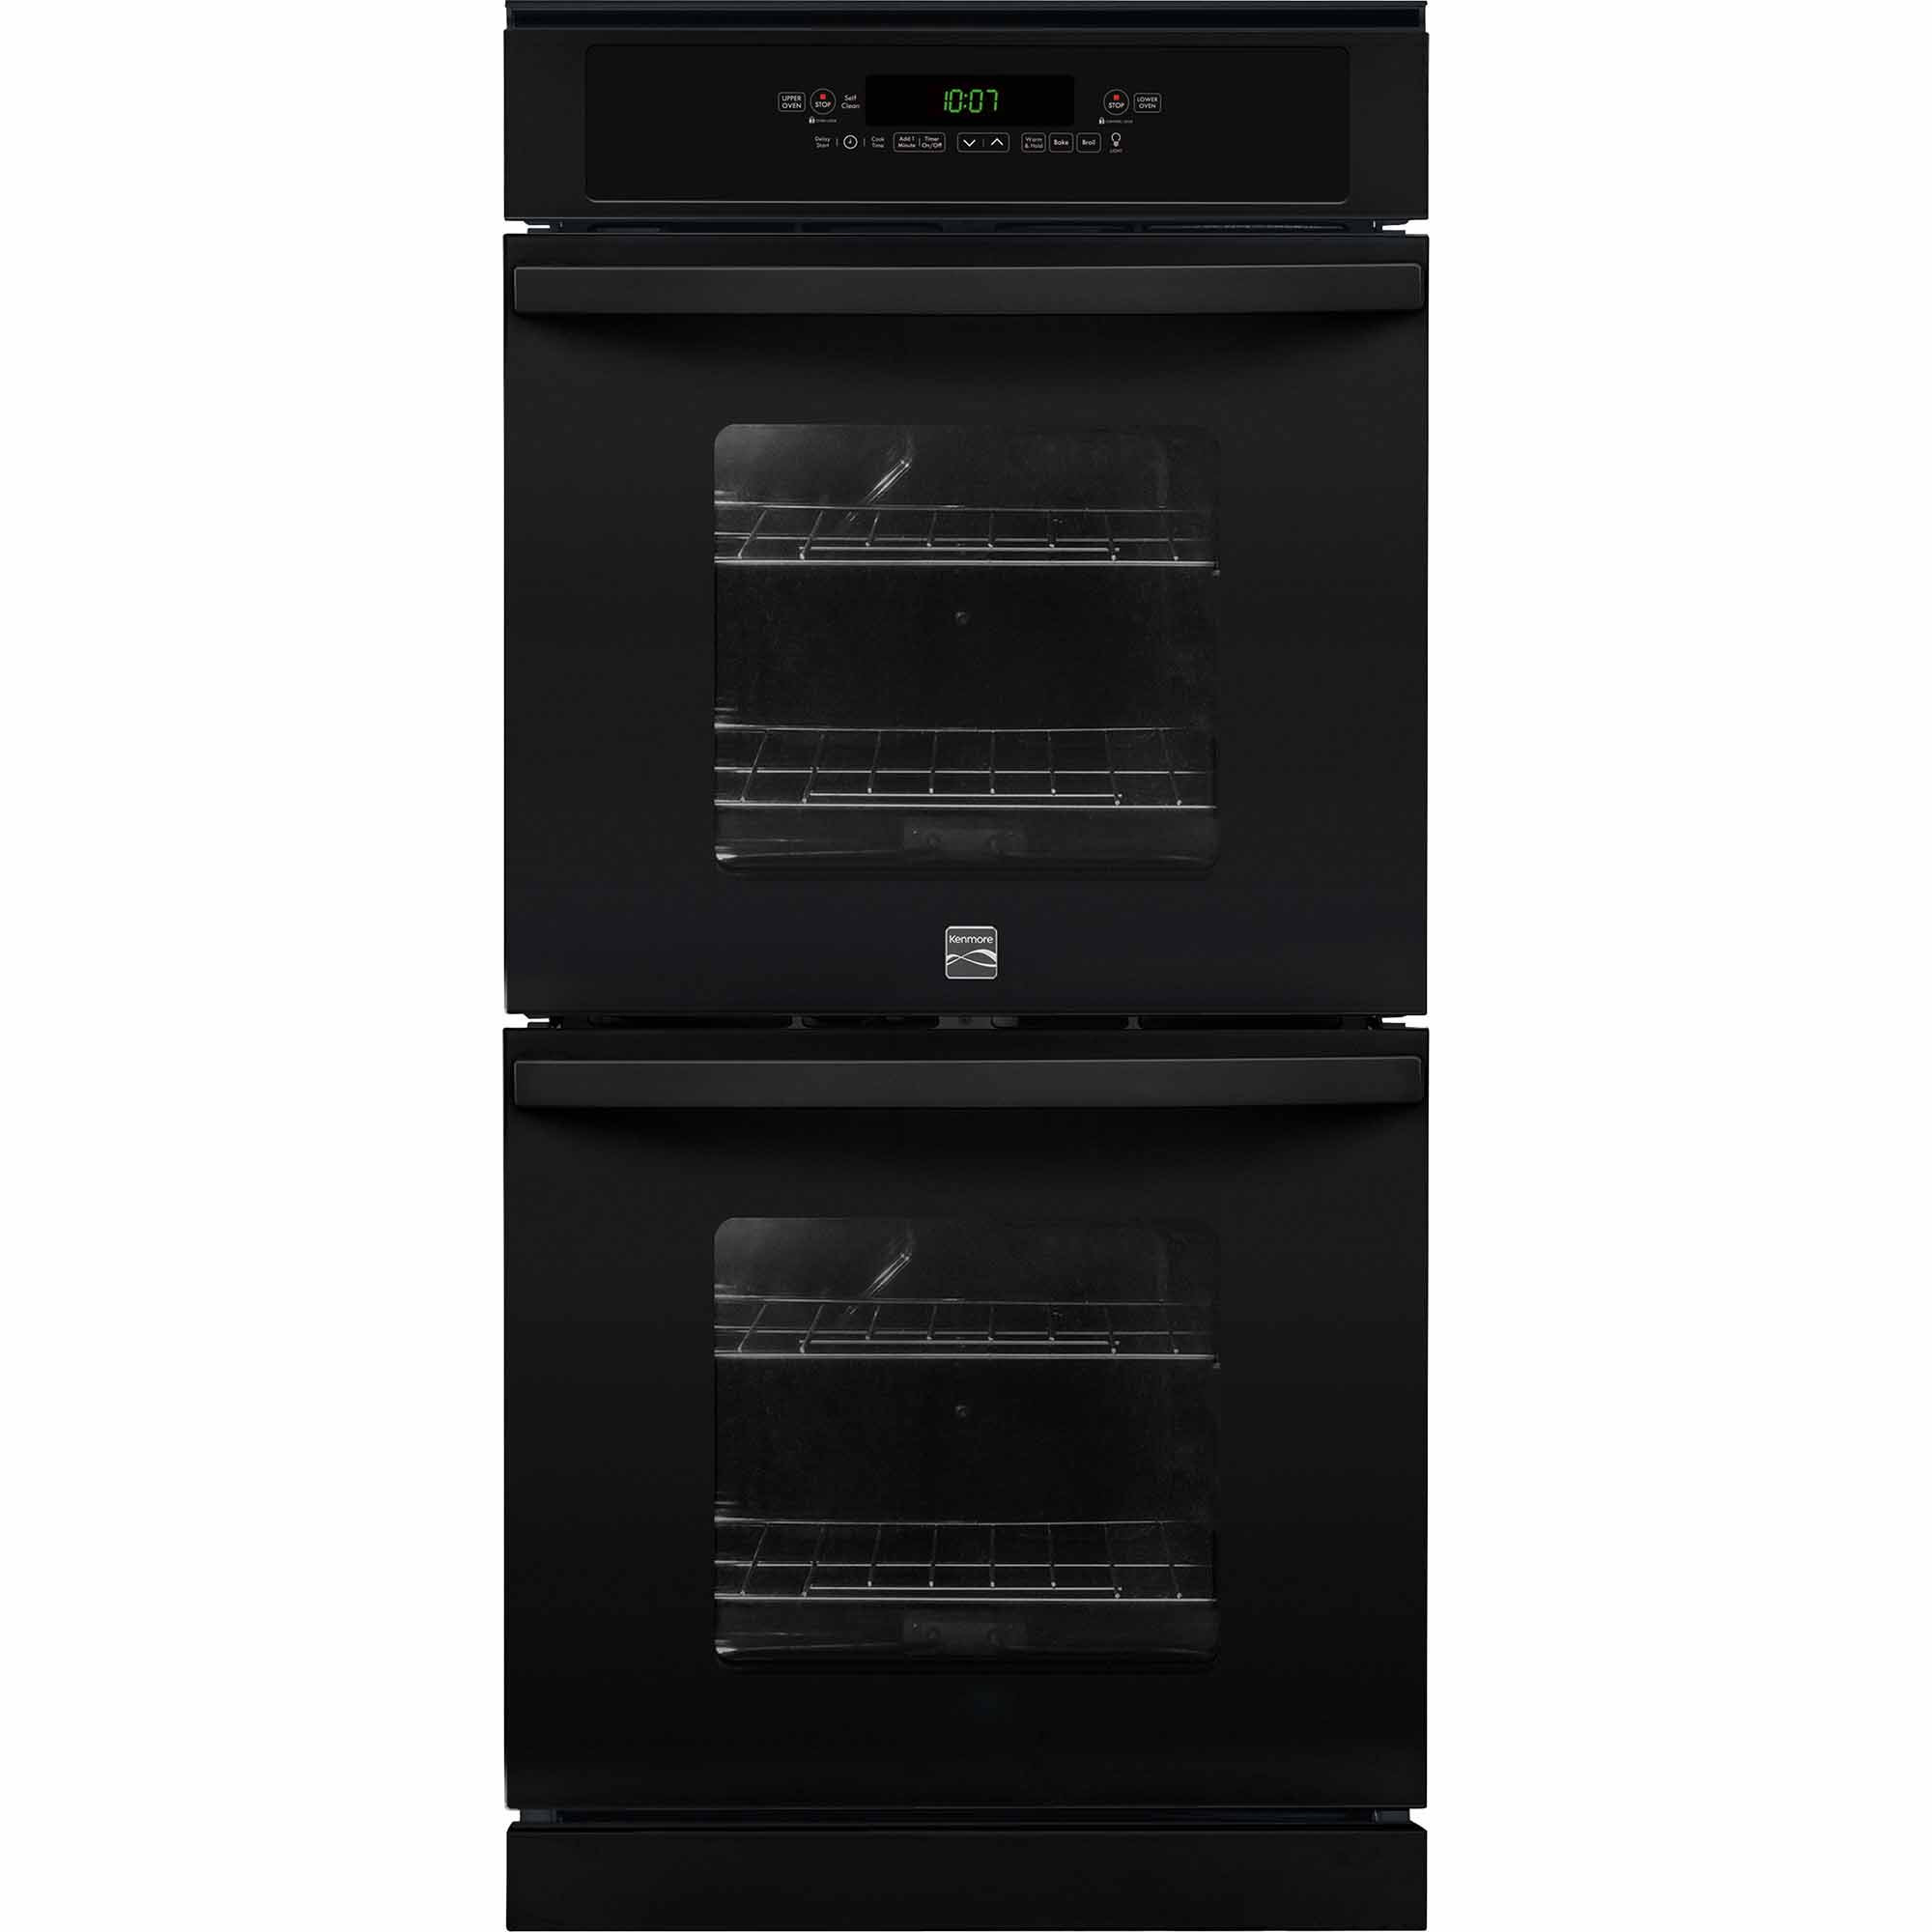 0012505802089 - 40259 24 MANUAL CLEAN ELECTRIC DOUBLE WALL OVEN - BLACK